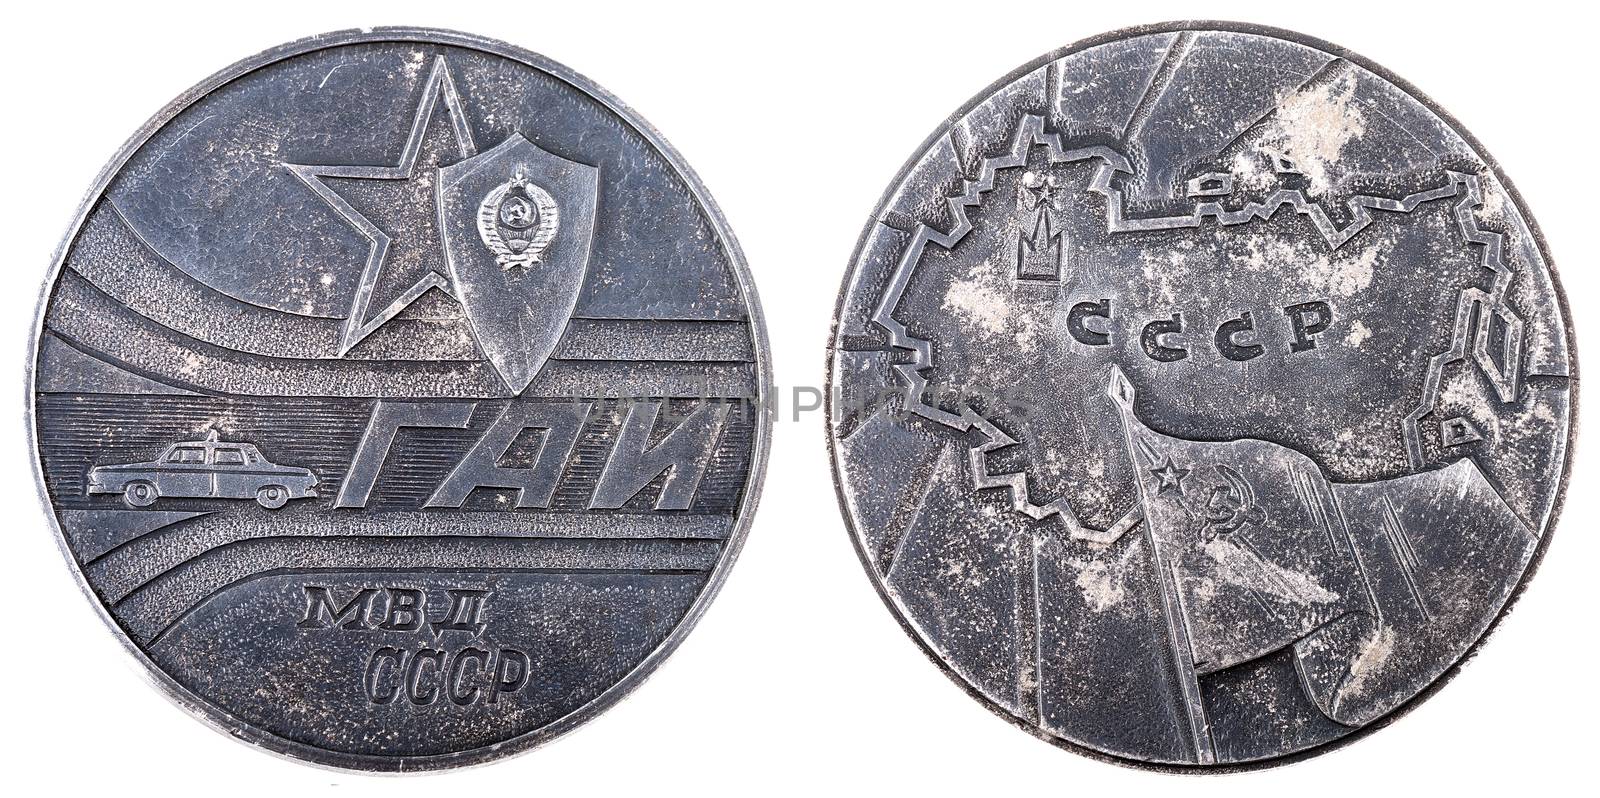 Medal of GAI (traffic police) of the Soviet Union.Metal token with police car and words GAI, MVD (Ministry of internal affairs), USSR.